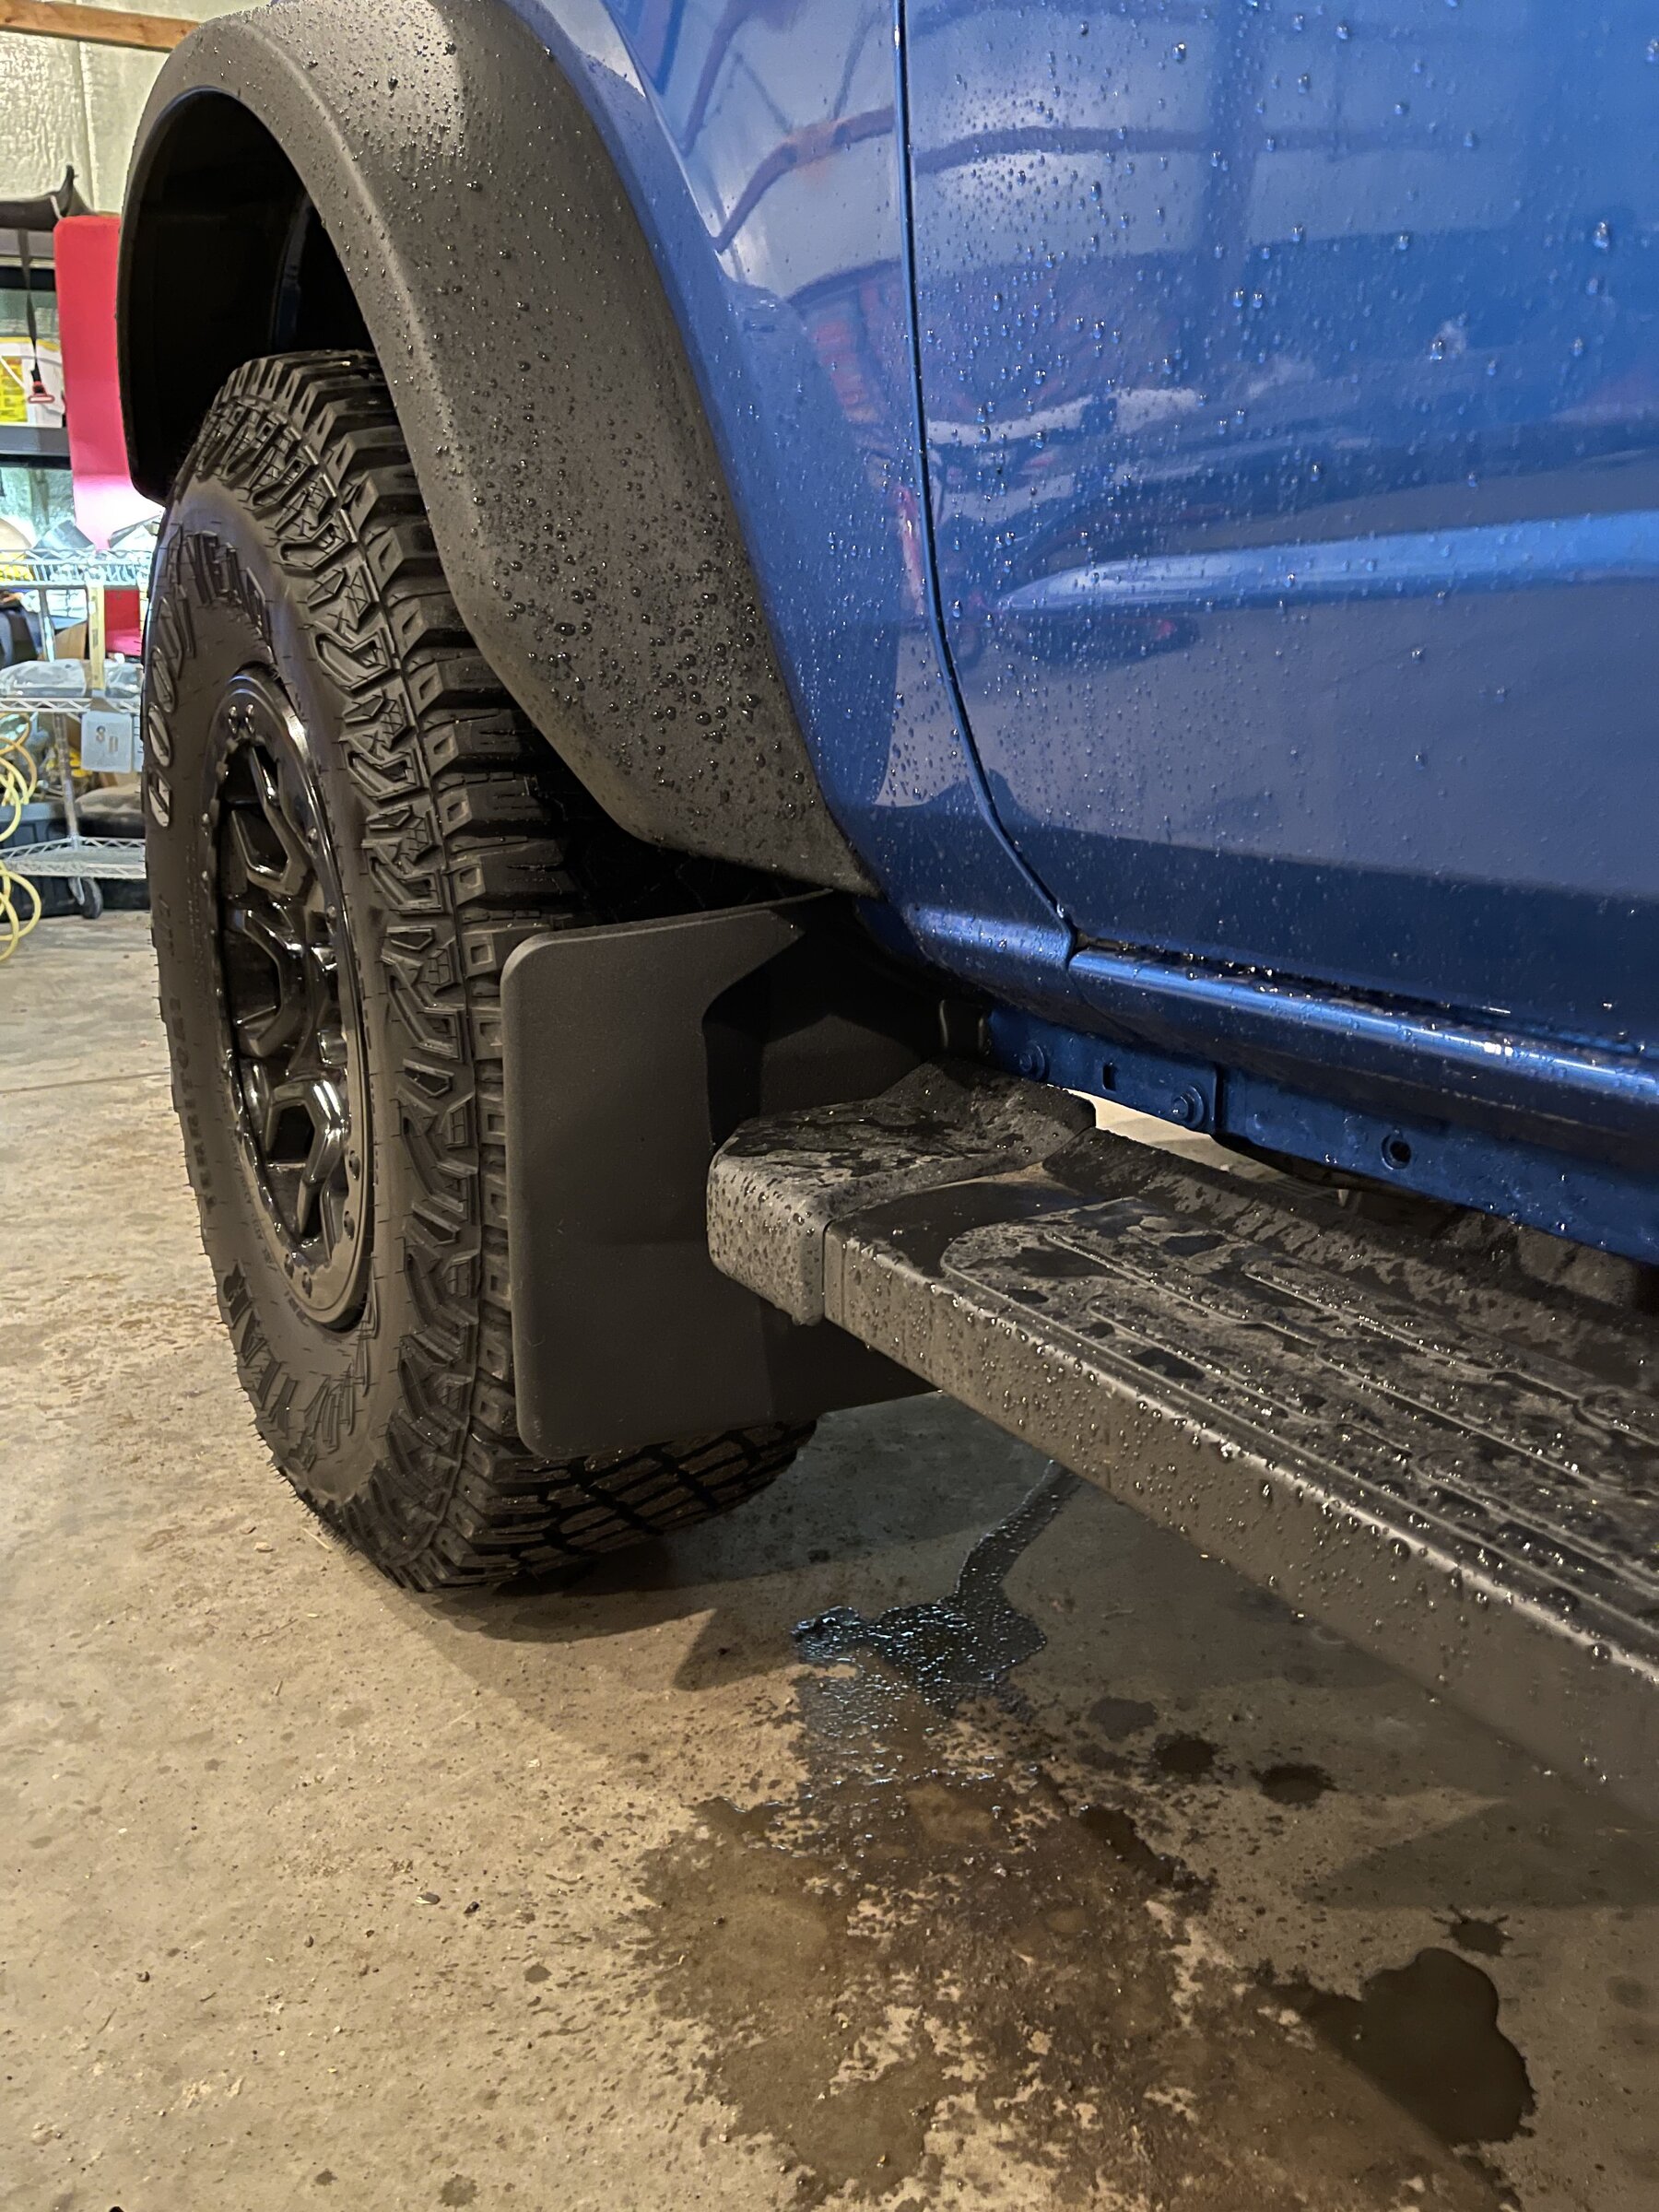 Ford Bronco Weather Tech Mud Flaps for Wildtrack installed 5F4FD363-9E2B-4622-B717-3C55BC3F931D